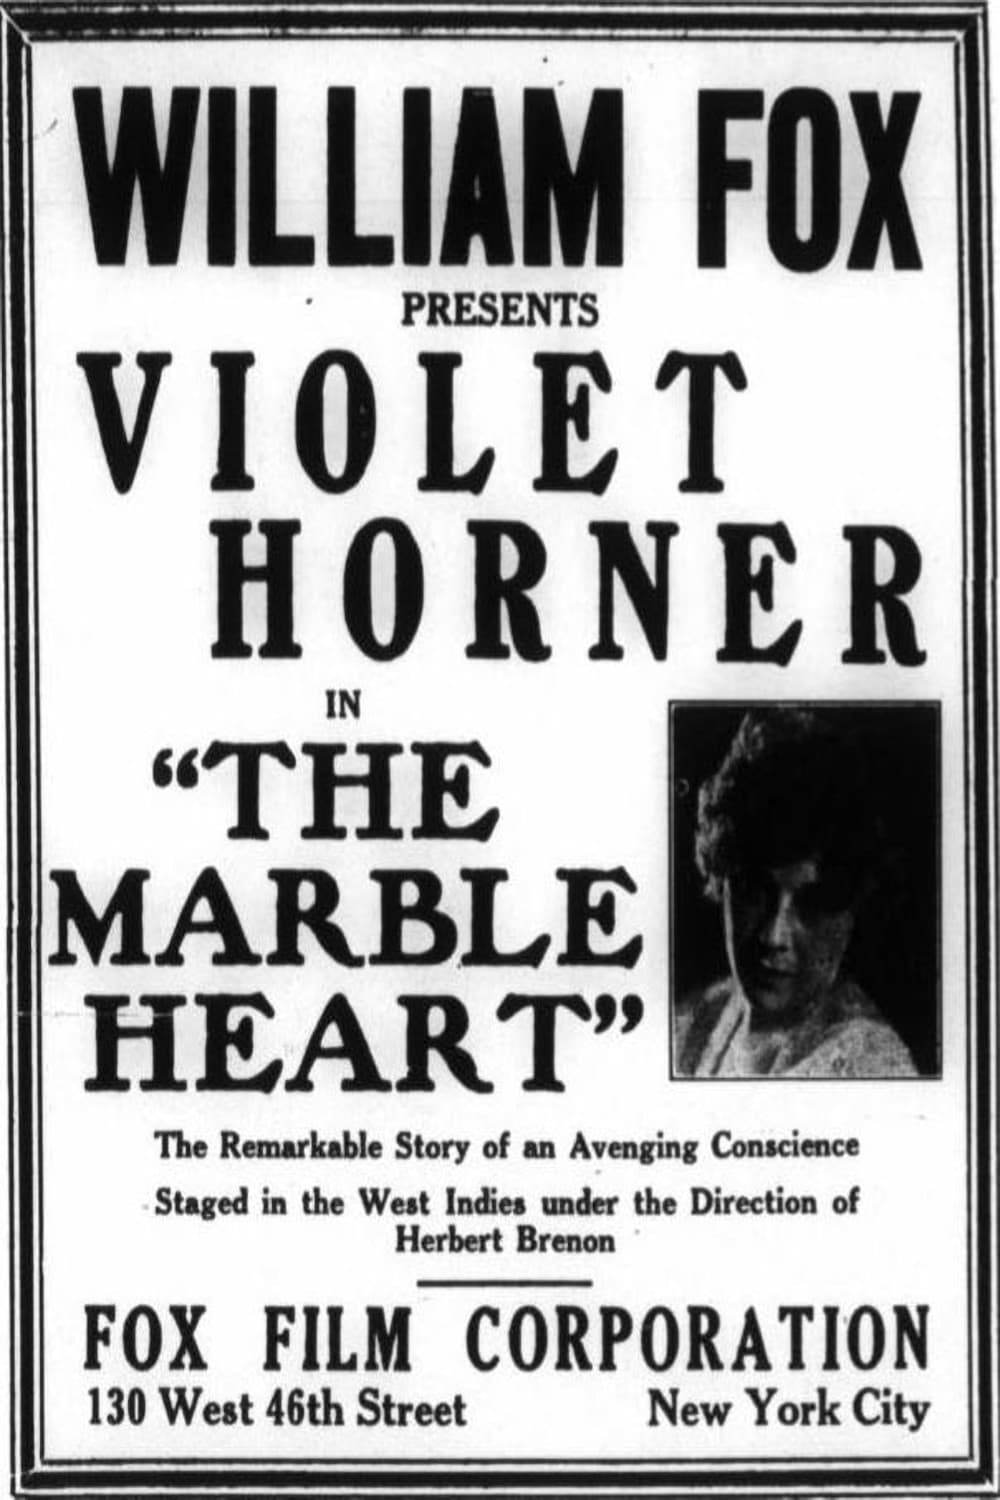 The Marble Heart